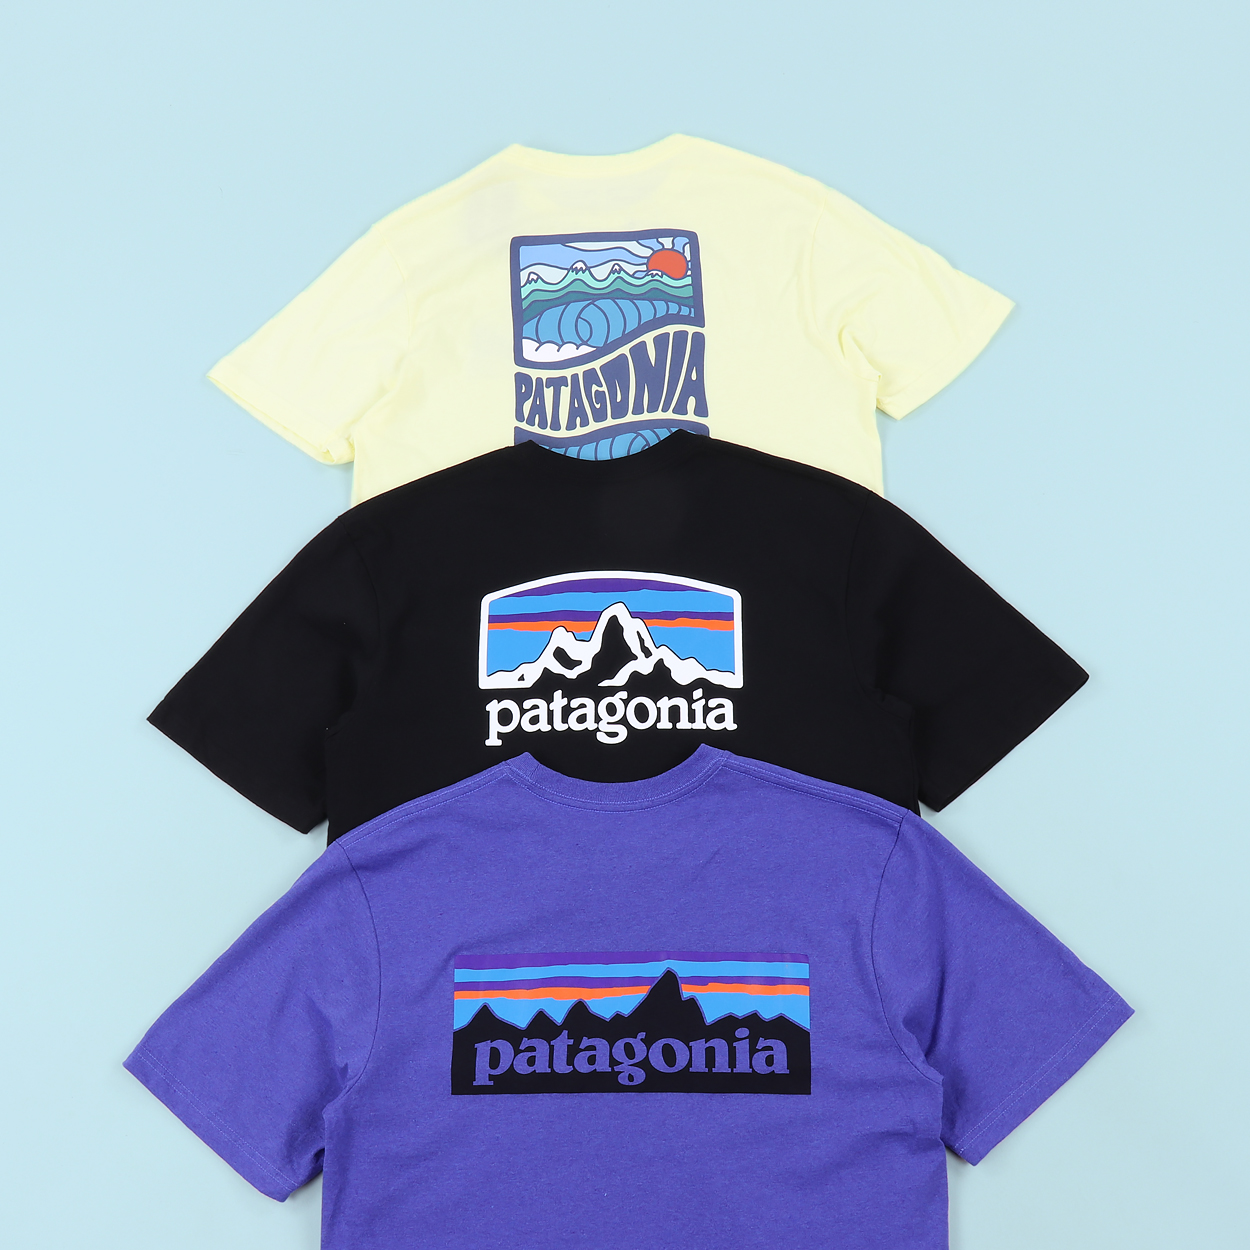 Patagonia T-Shirts at Working Class Heroes - Proper Magazine